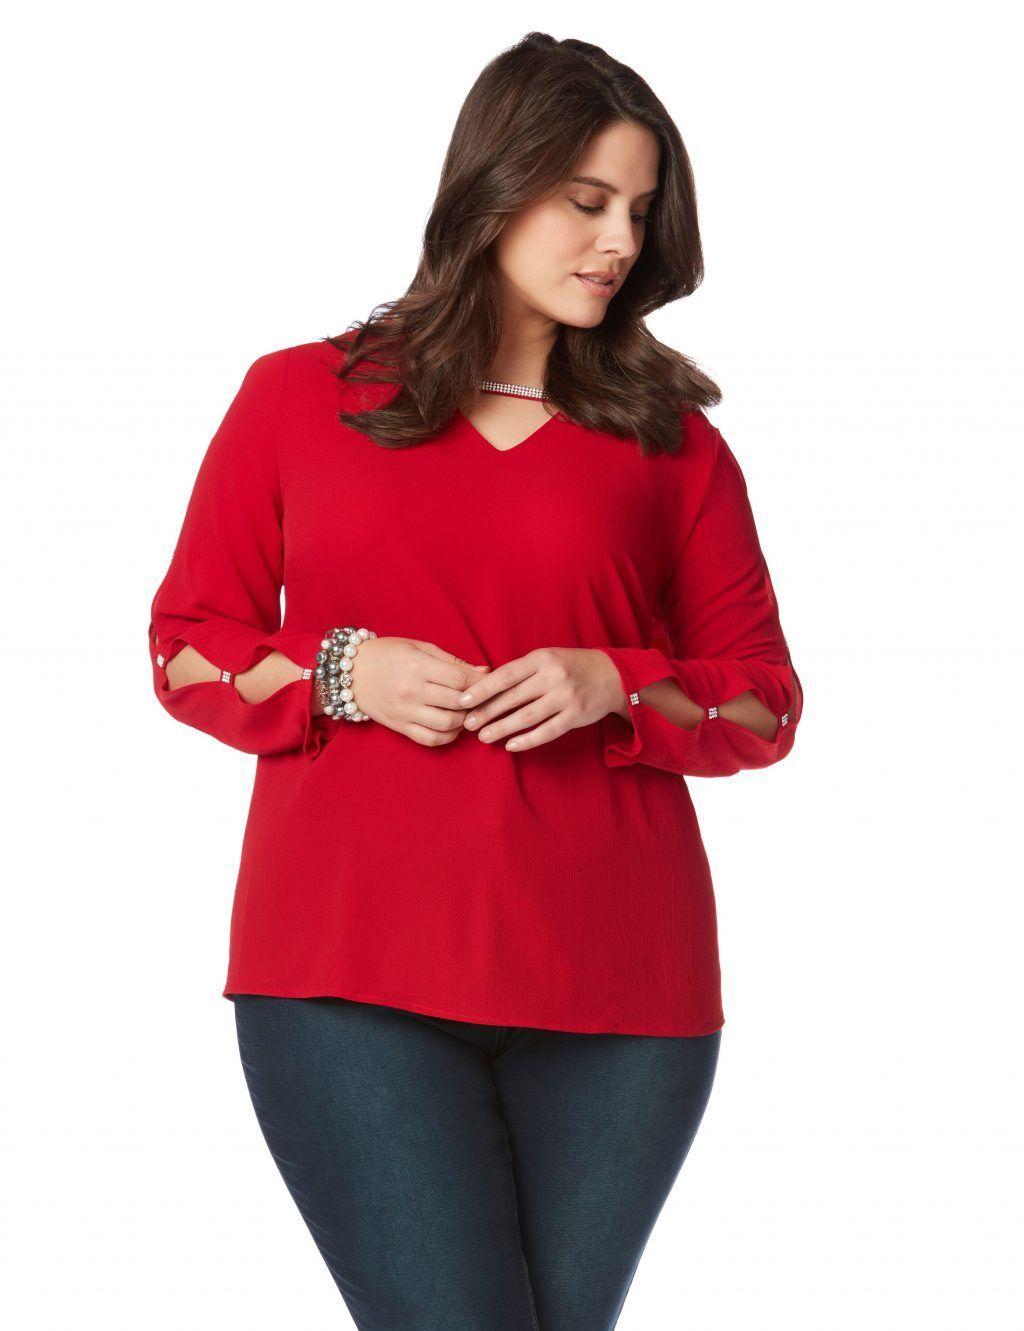 Catherines Clothing Logo - Clothing: Clothing Petite Shop Plus Size Collection Catherines Store